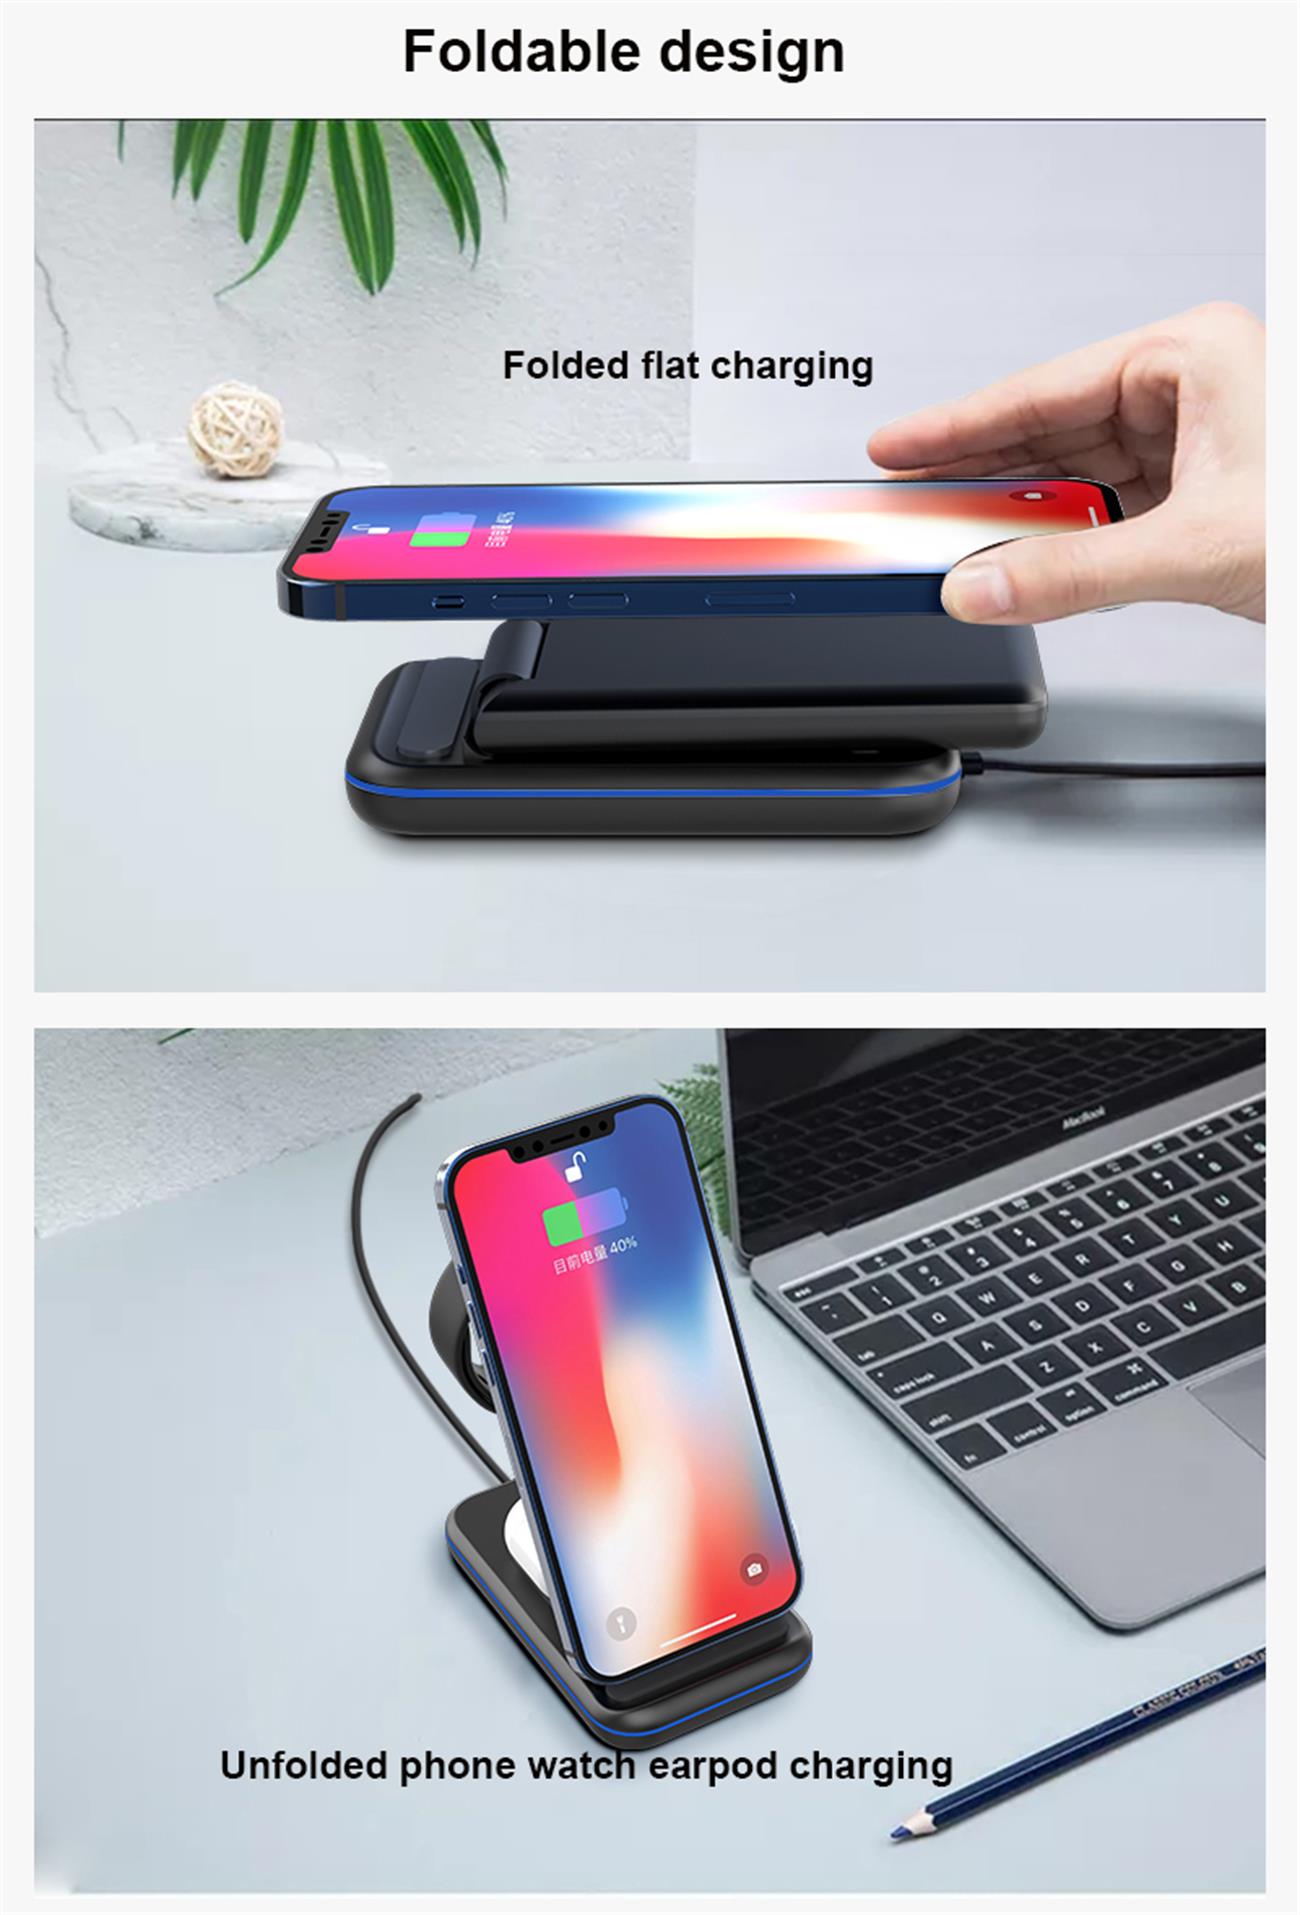 Multifunctional Wireless Charger Foldable 3 In 1 For Smart Phone Watch Earphone